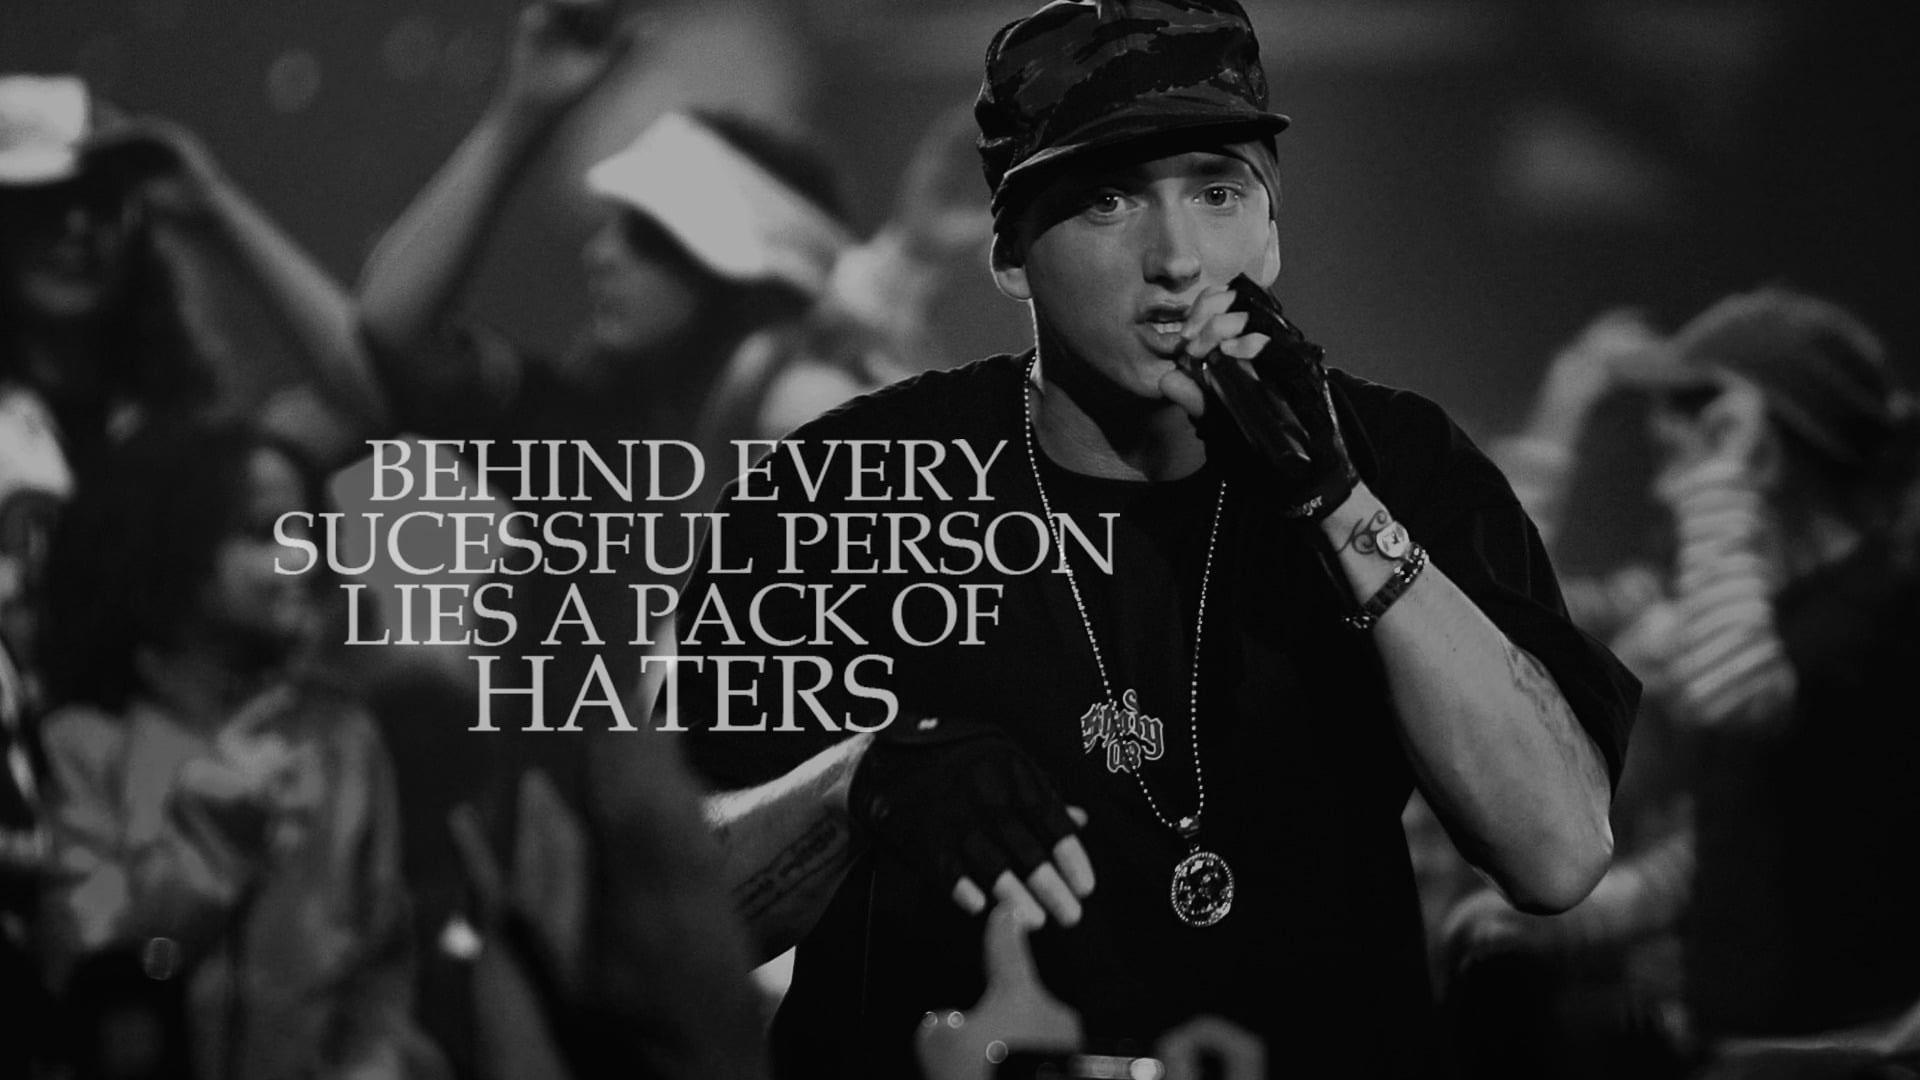 Eminem wallpaper quote monochrome munication social issues sign â wallpaper for you